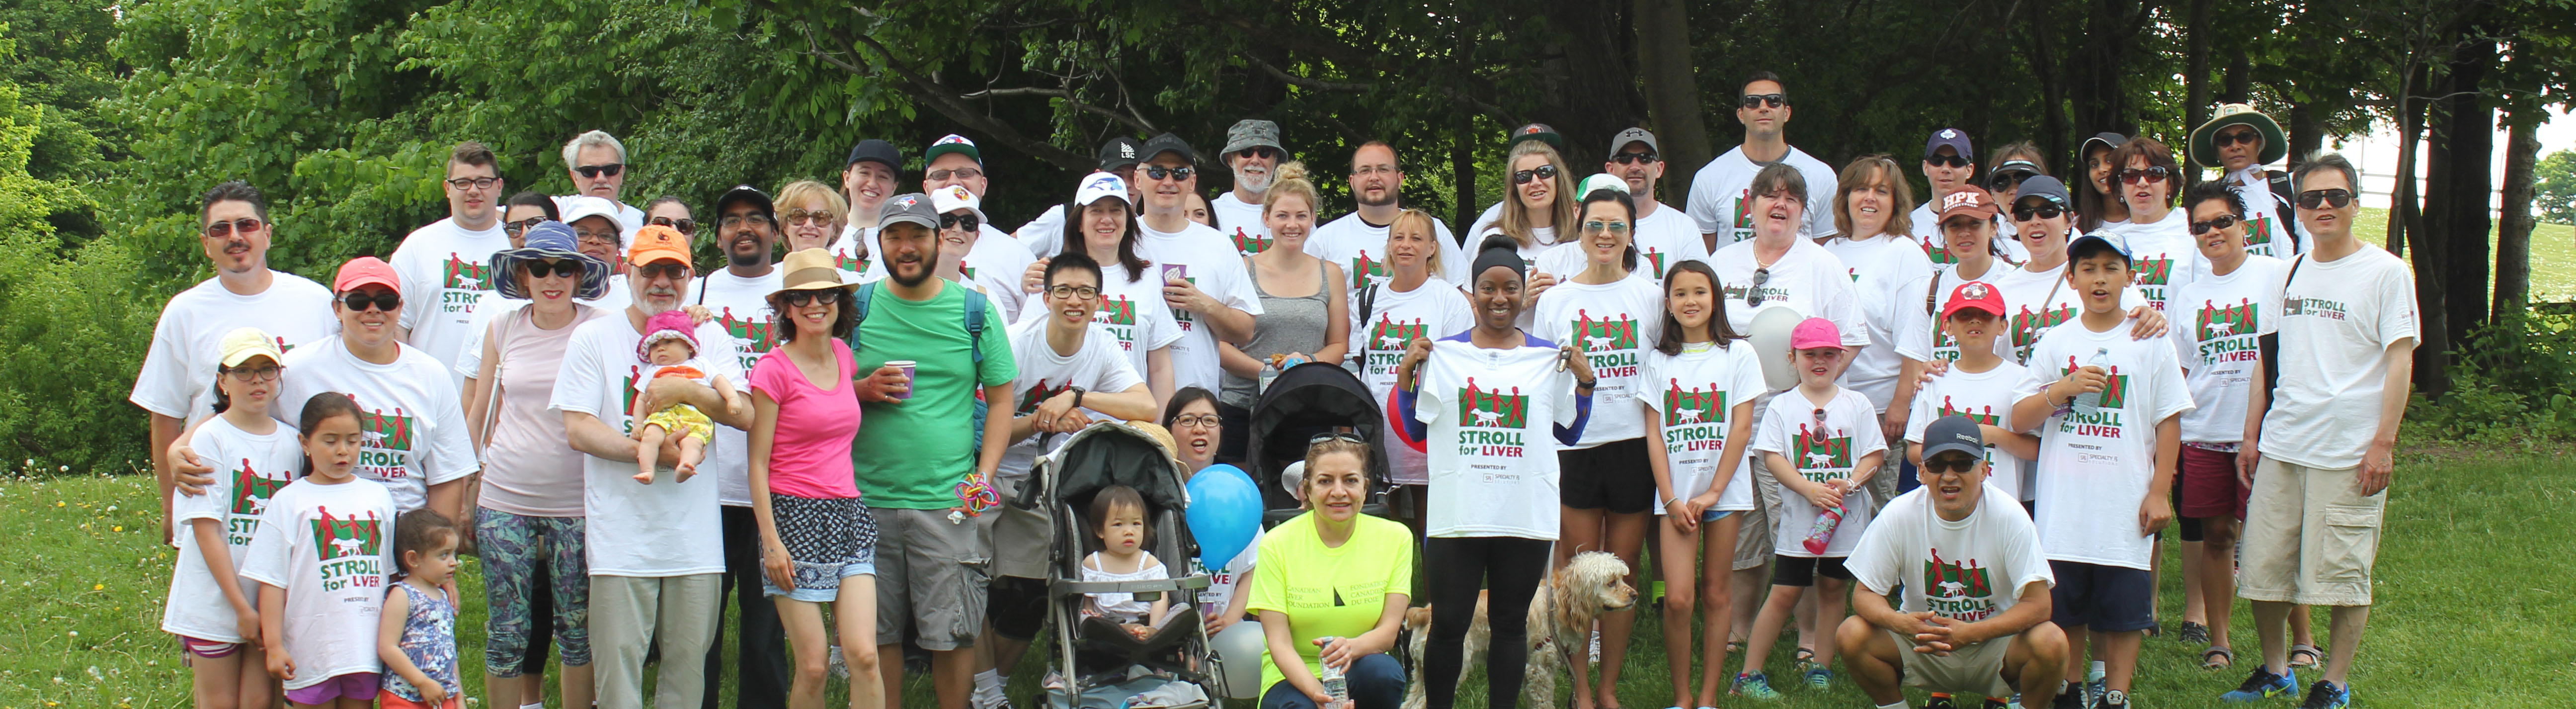 A group of Stroll for Liver participants pose with each other on a grassy field